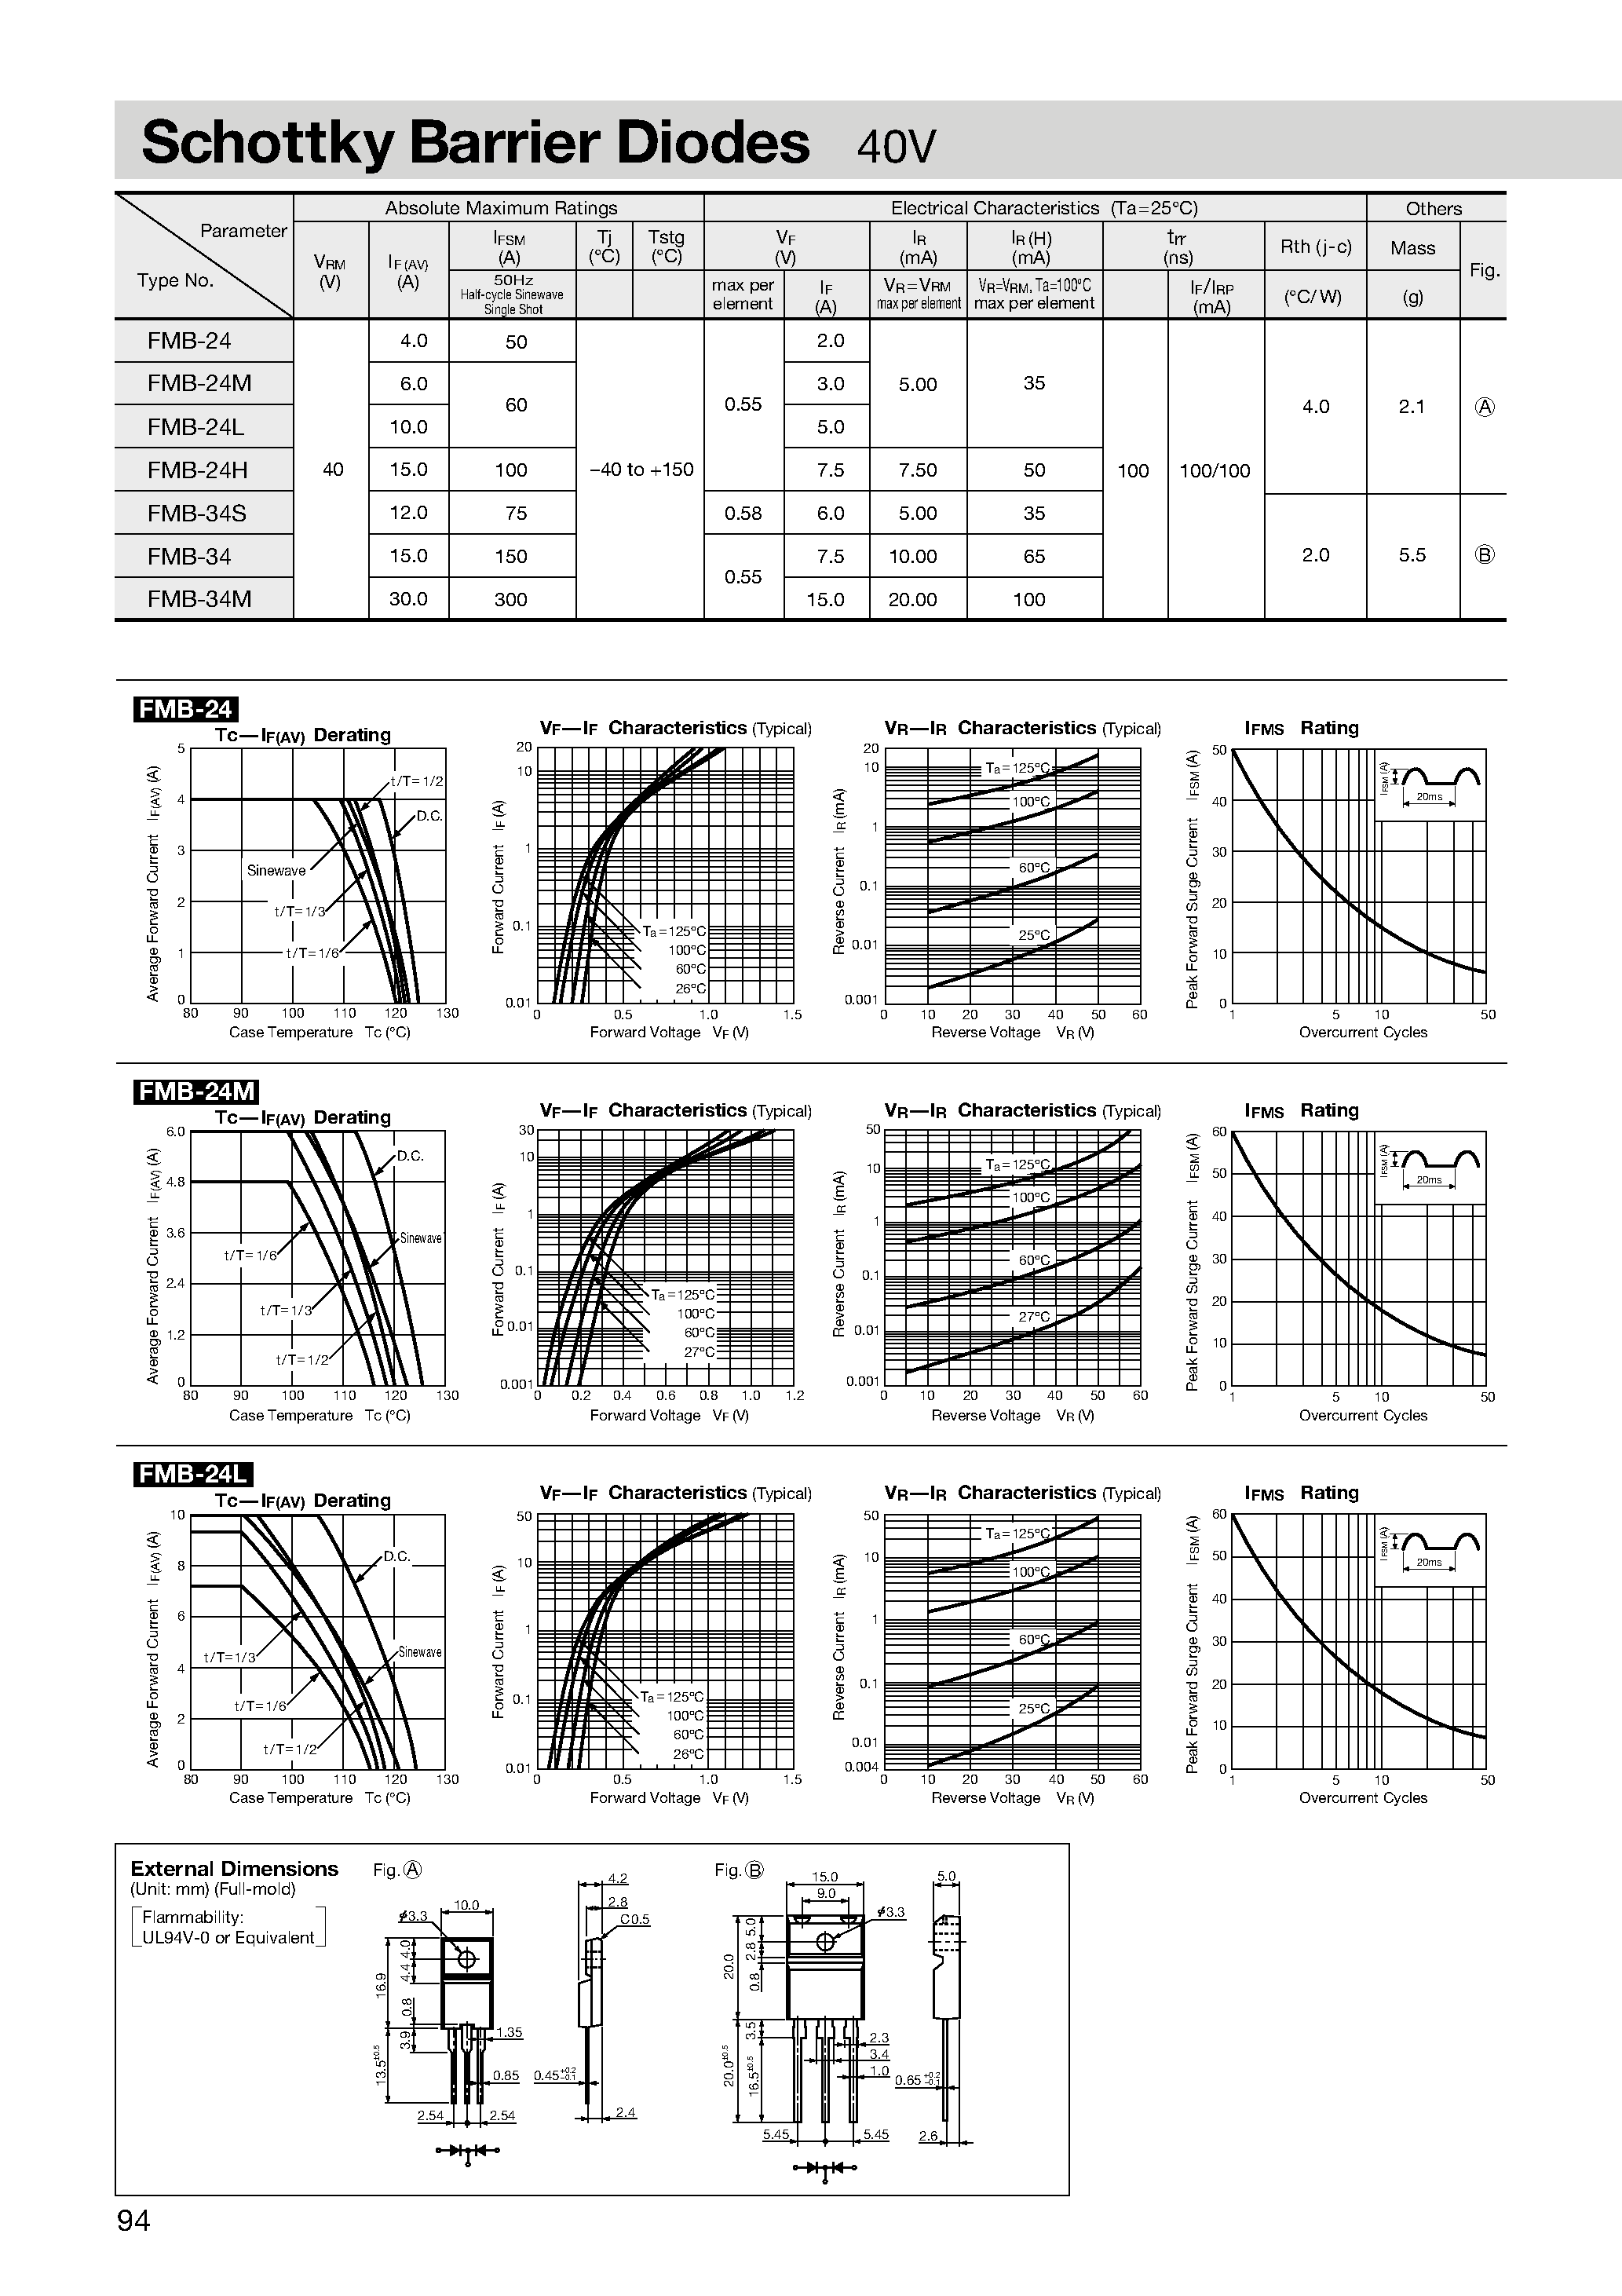 Datasheet FMB-24 - Schottky Barrier Diodes 40V page 1